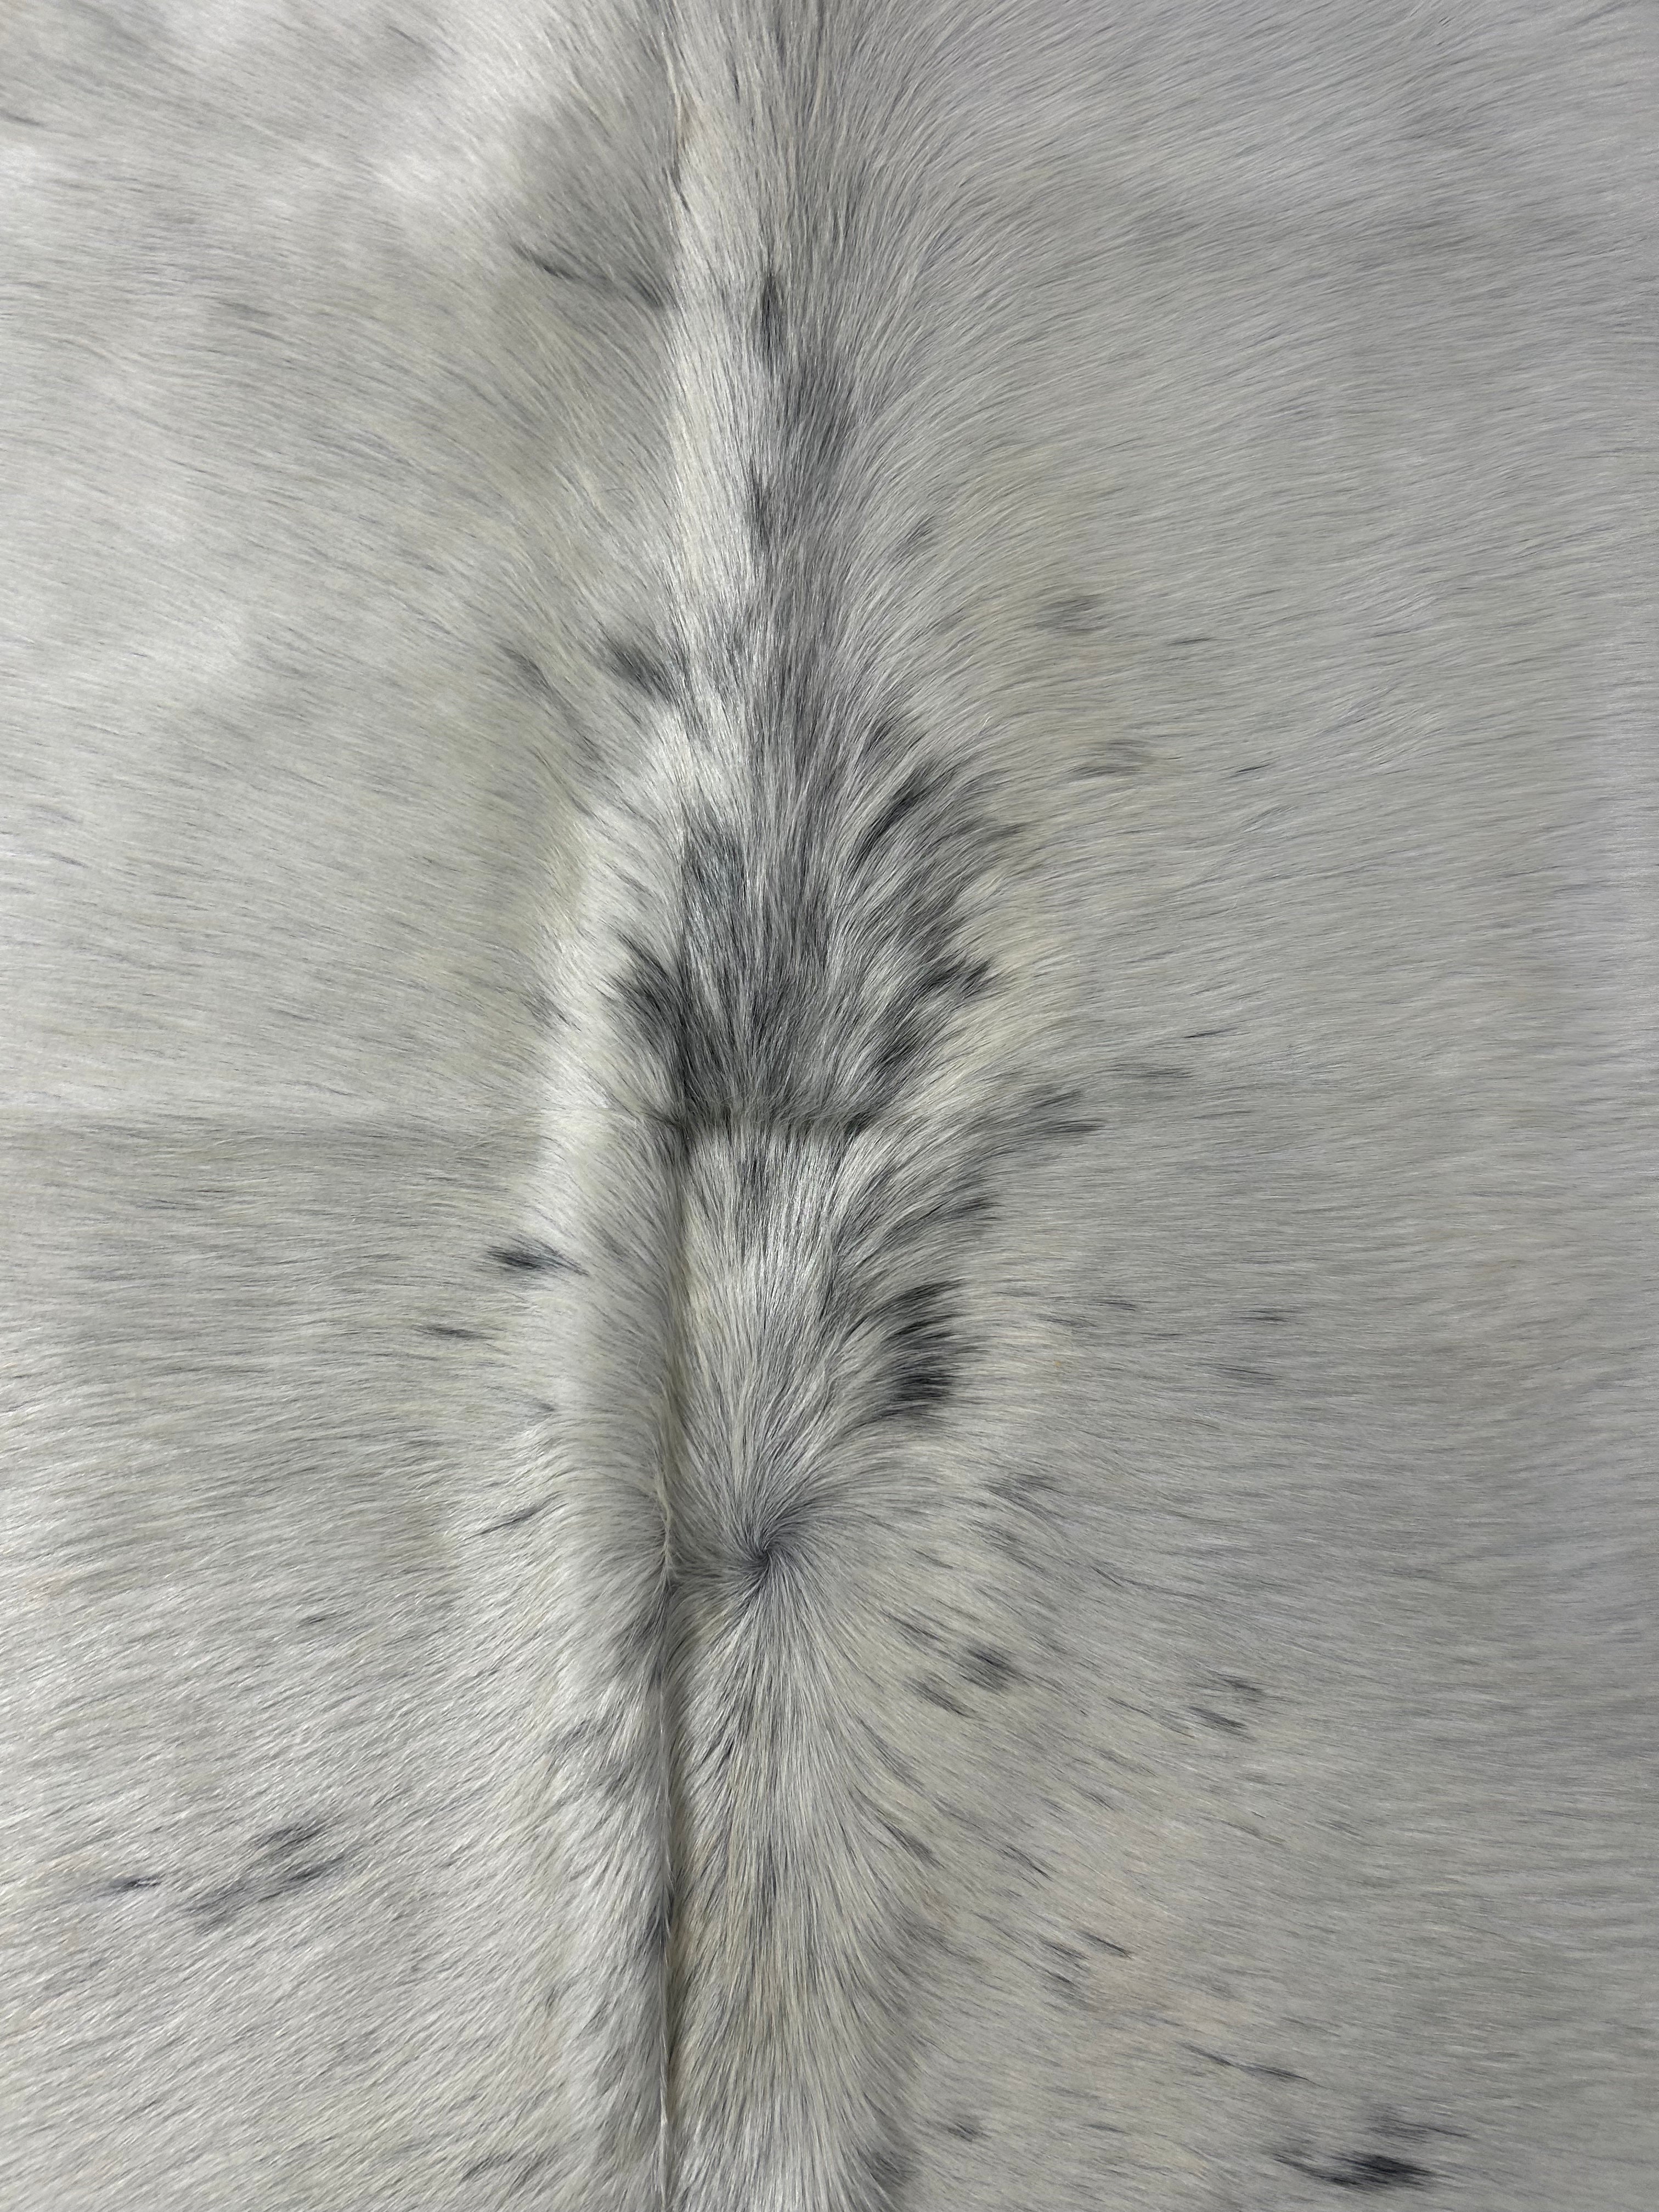 Almost Solid White Cowhide Rug (some small spots) Size: 6.2x6 feet M-1683